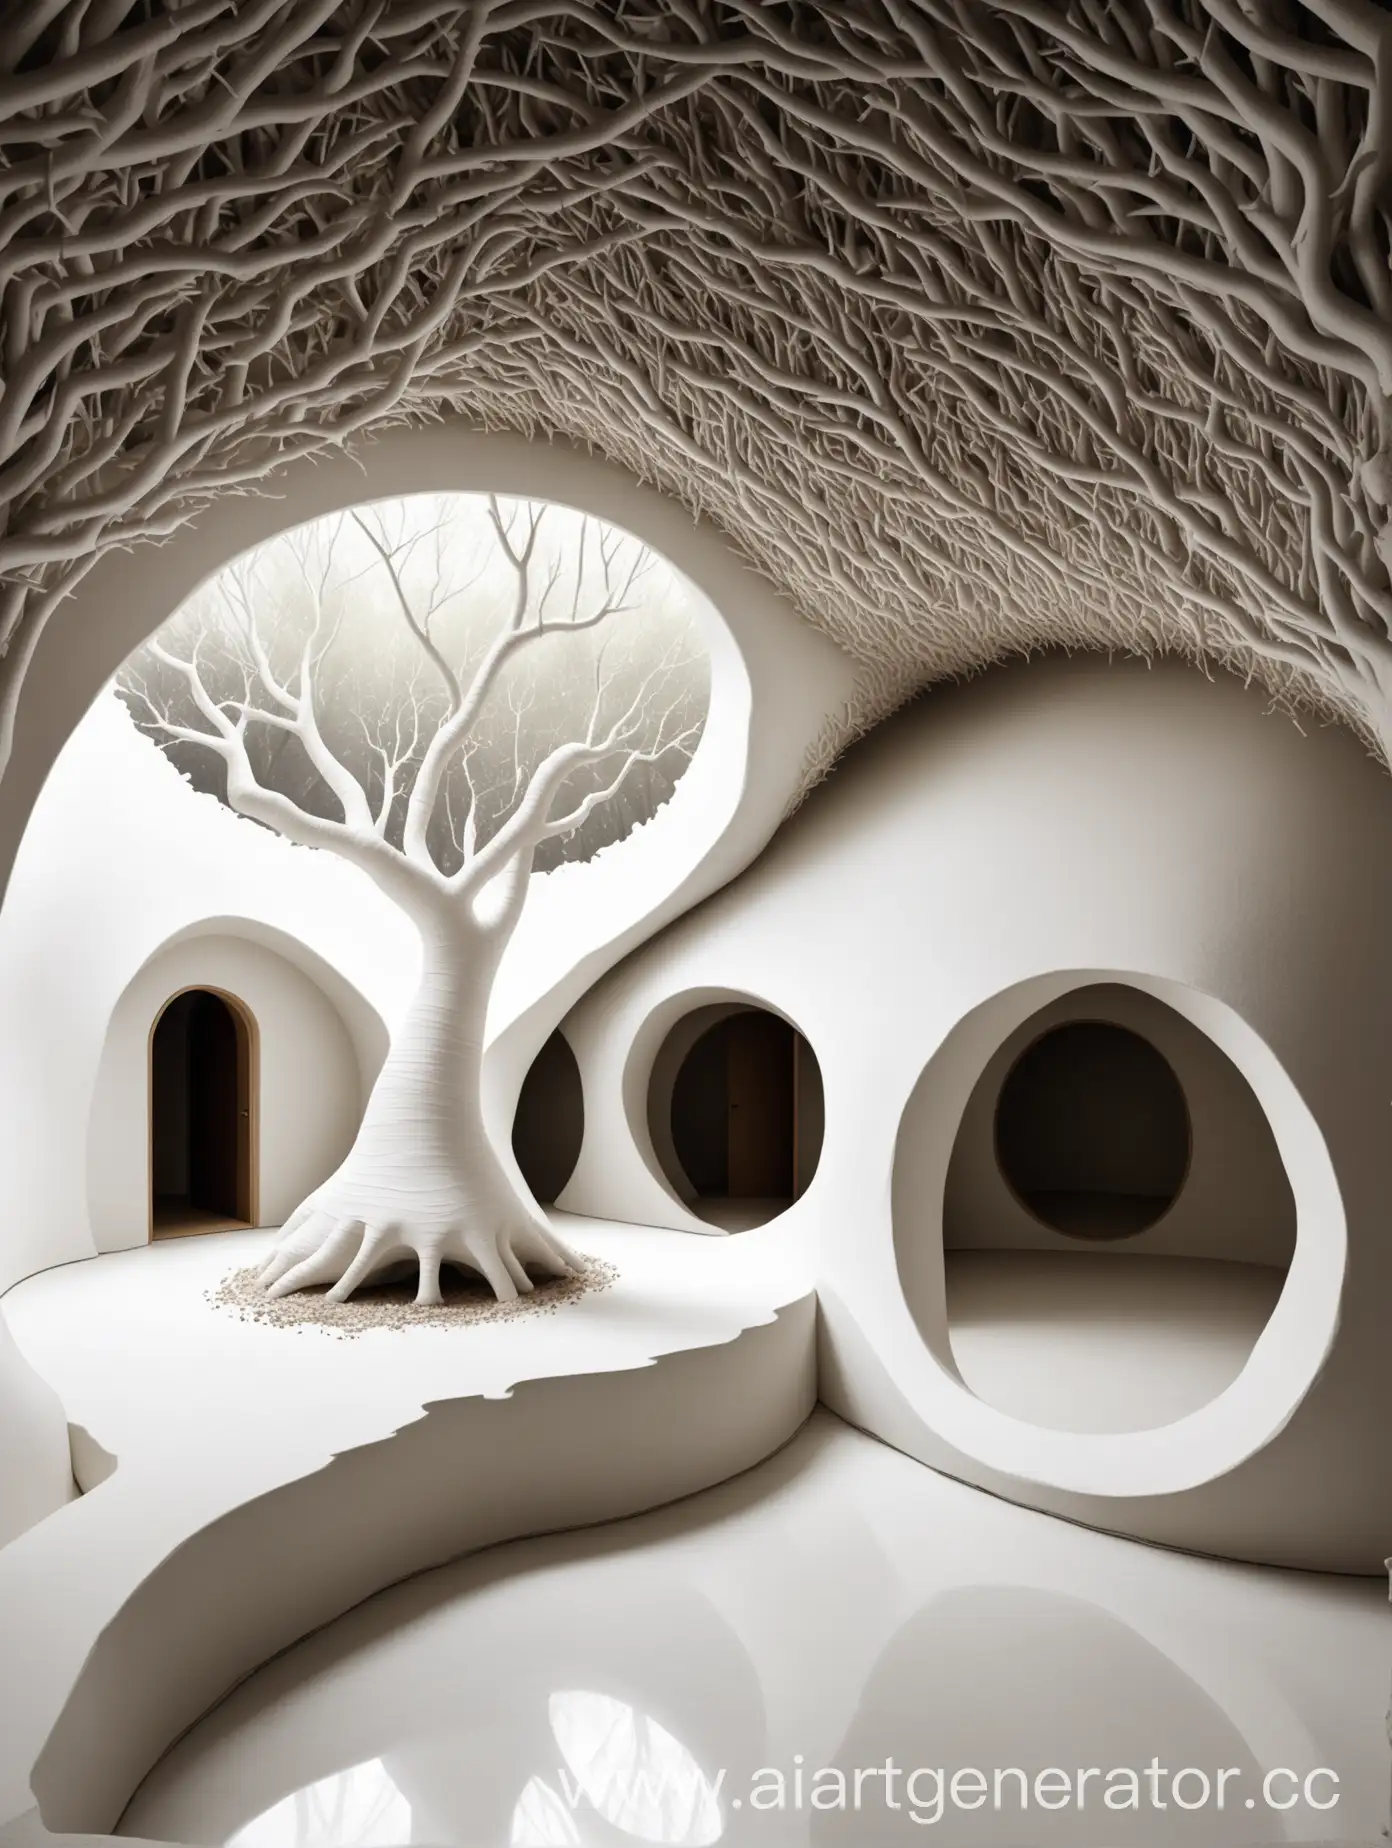 Organic-Tree-House-Interior-with-White-Clay-Walls-and-Living-Branches